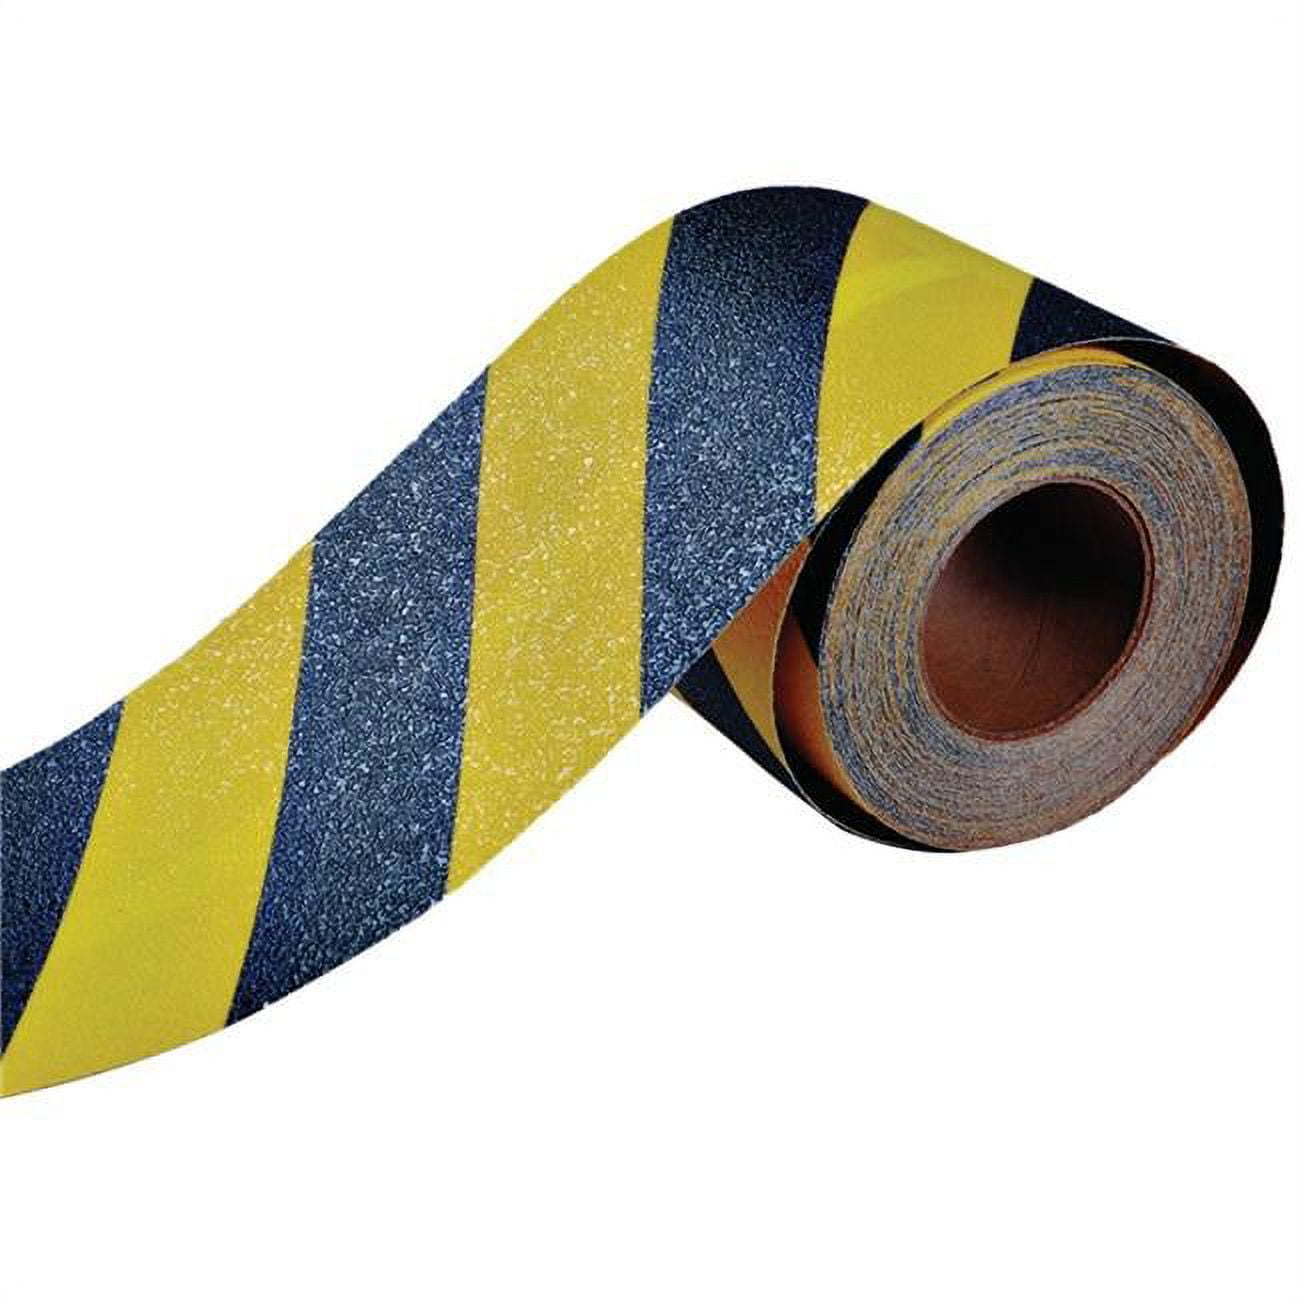 Durable 825r4bky Anti-slip Tape, 4 X 60 In. - Black & Yellow